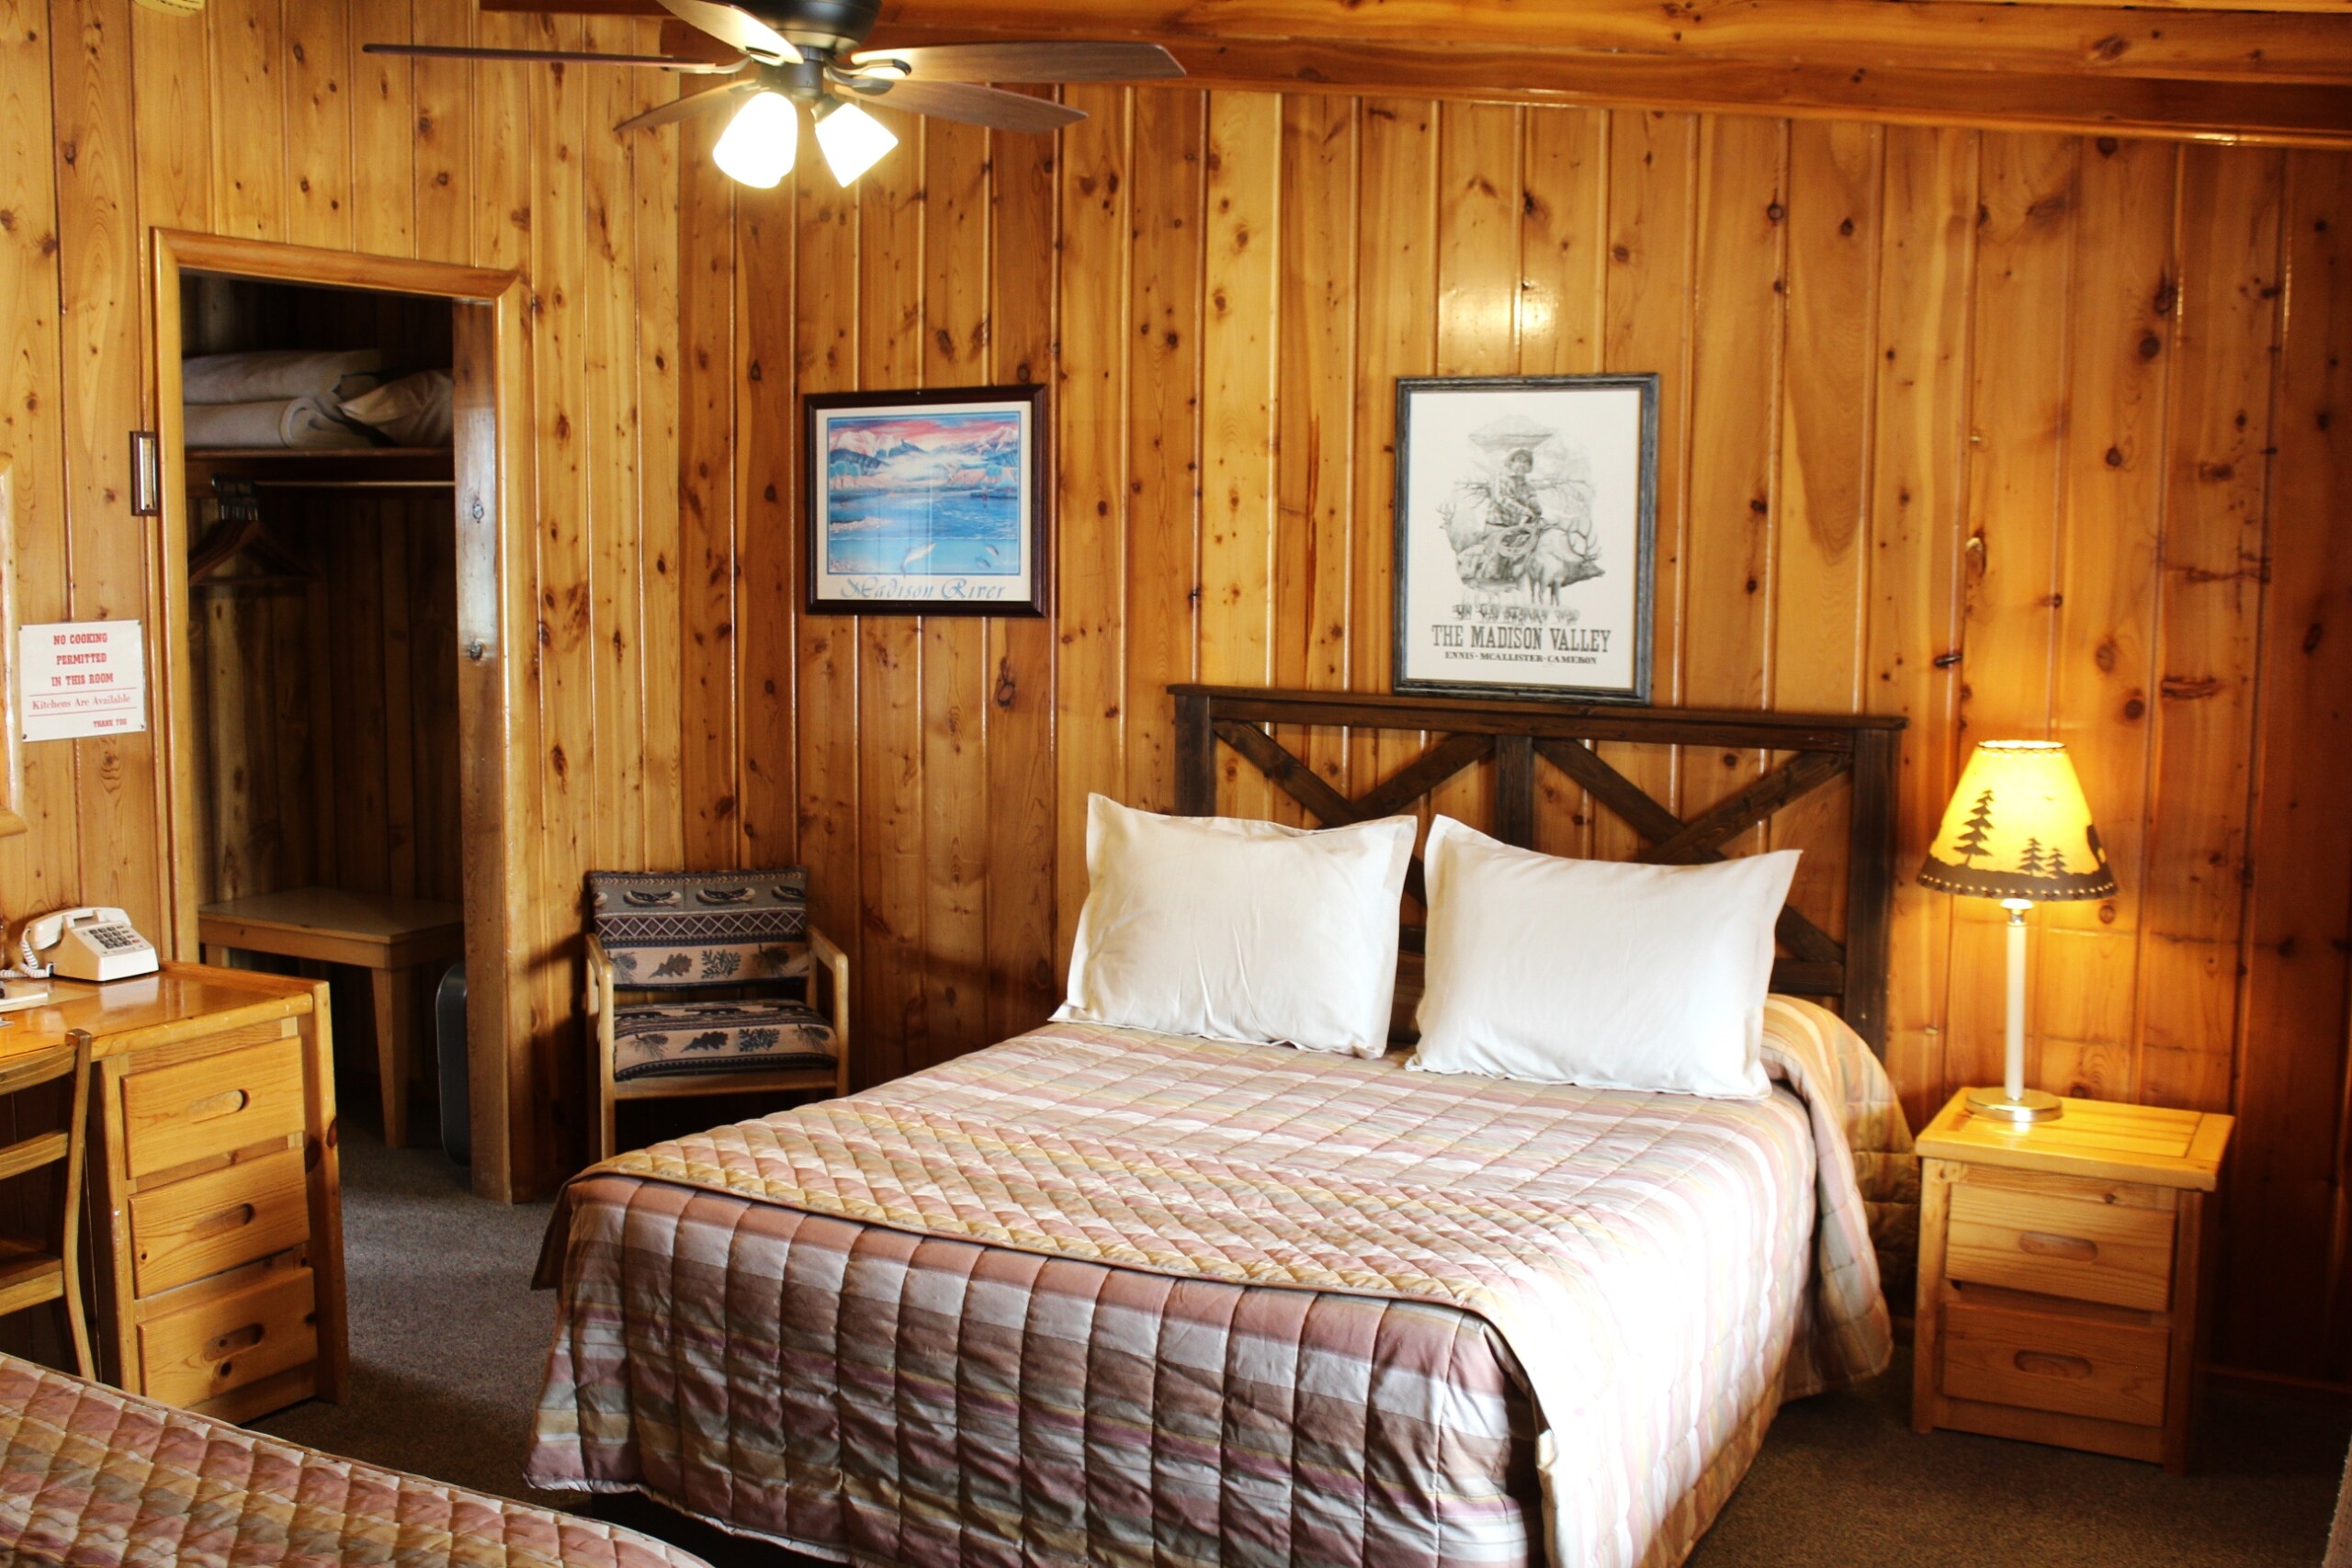 Double queen rooms at the Rainbow Valley Lodge in Ennis Montana